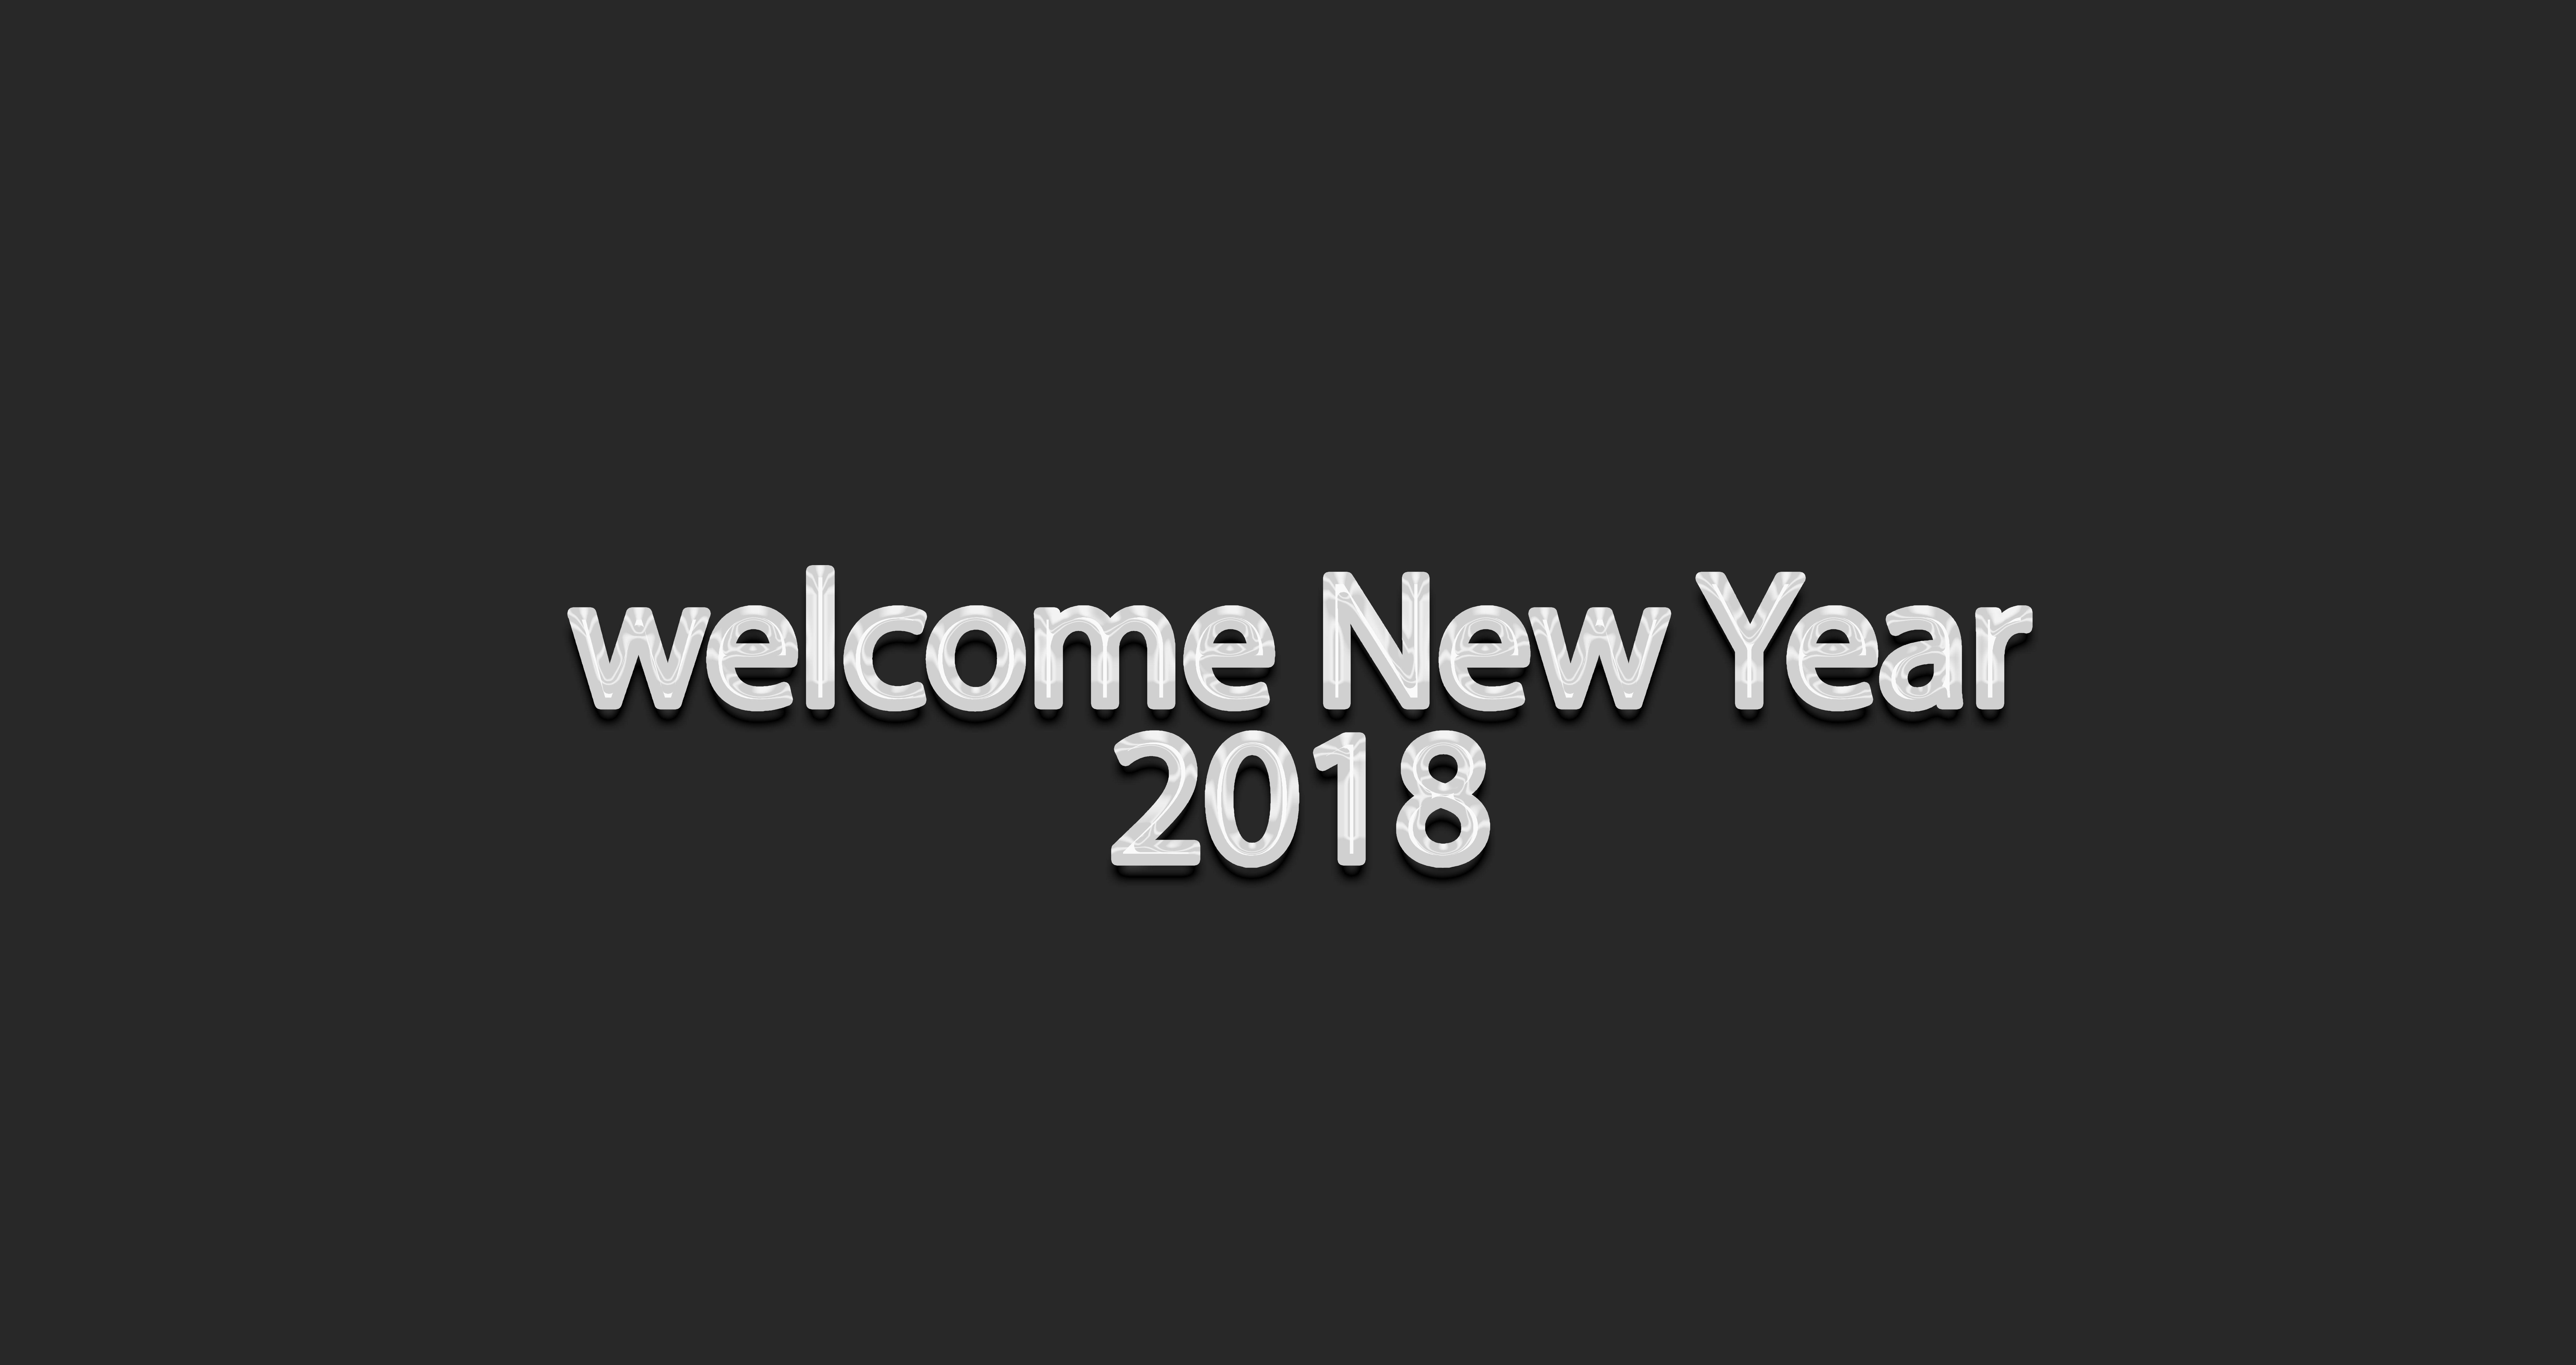 Goodbye 2017 Welcome 2018 New Year Image, Messages & SMS